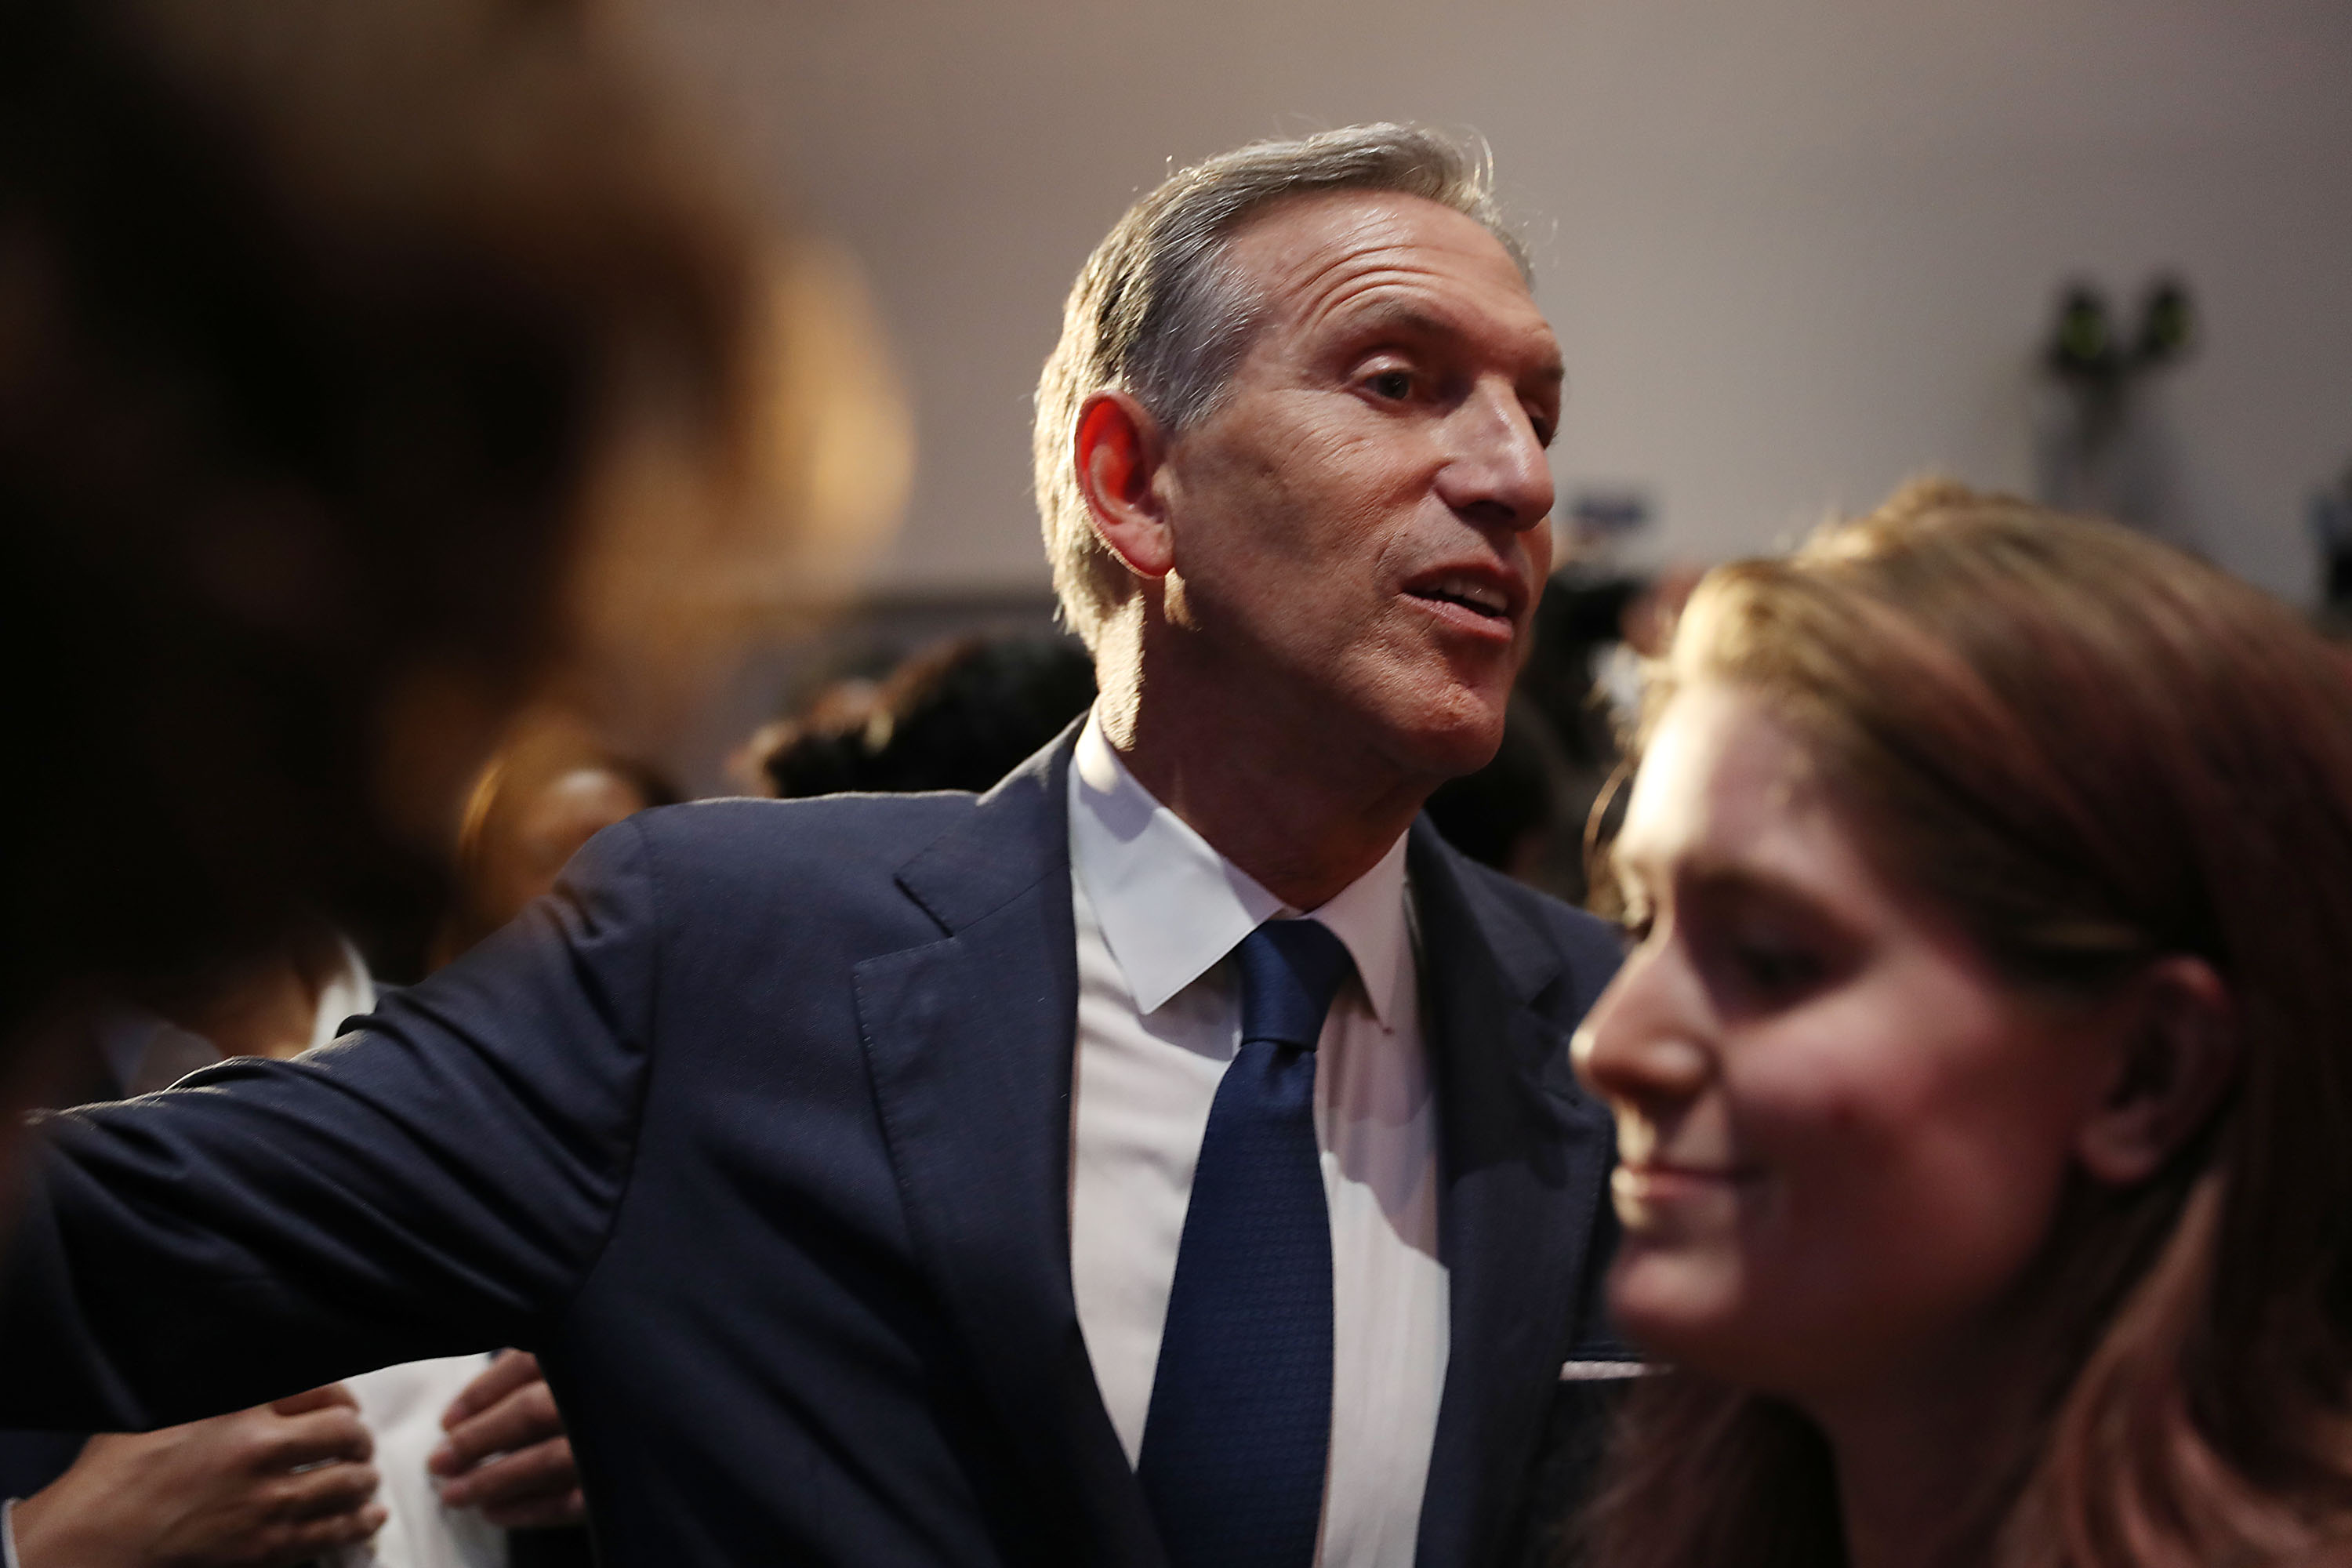 Former Starbucks CEO Howard Schultz greets people during a stop at Miami Dade College as he seeks a possible independent presidency run on March 13, 2019 in Miami, Florida. (Joe Raedle/Getty Images)